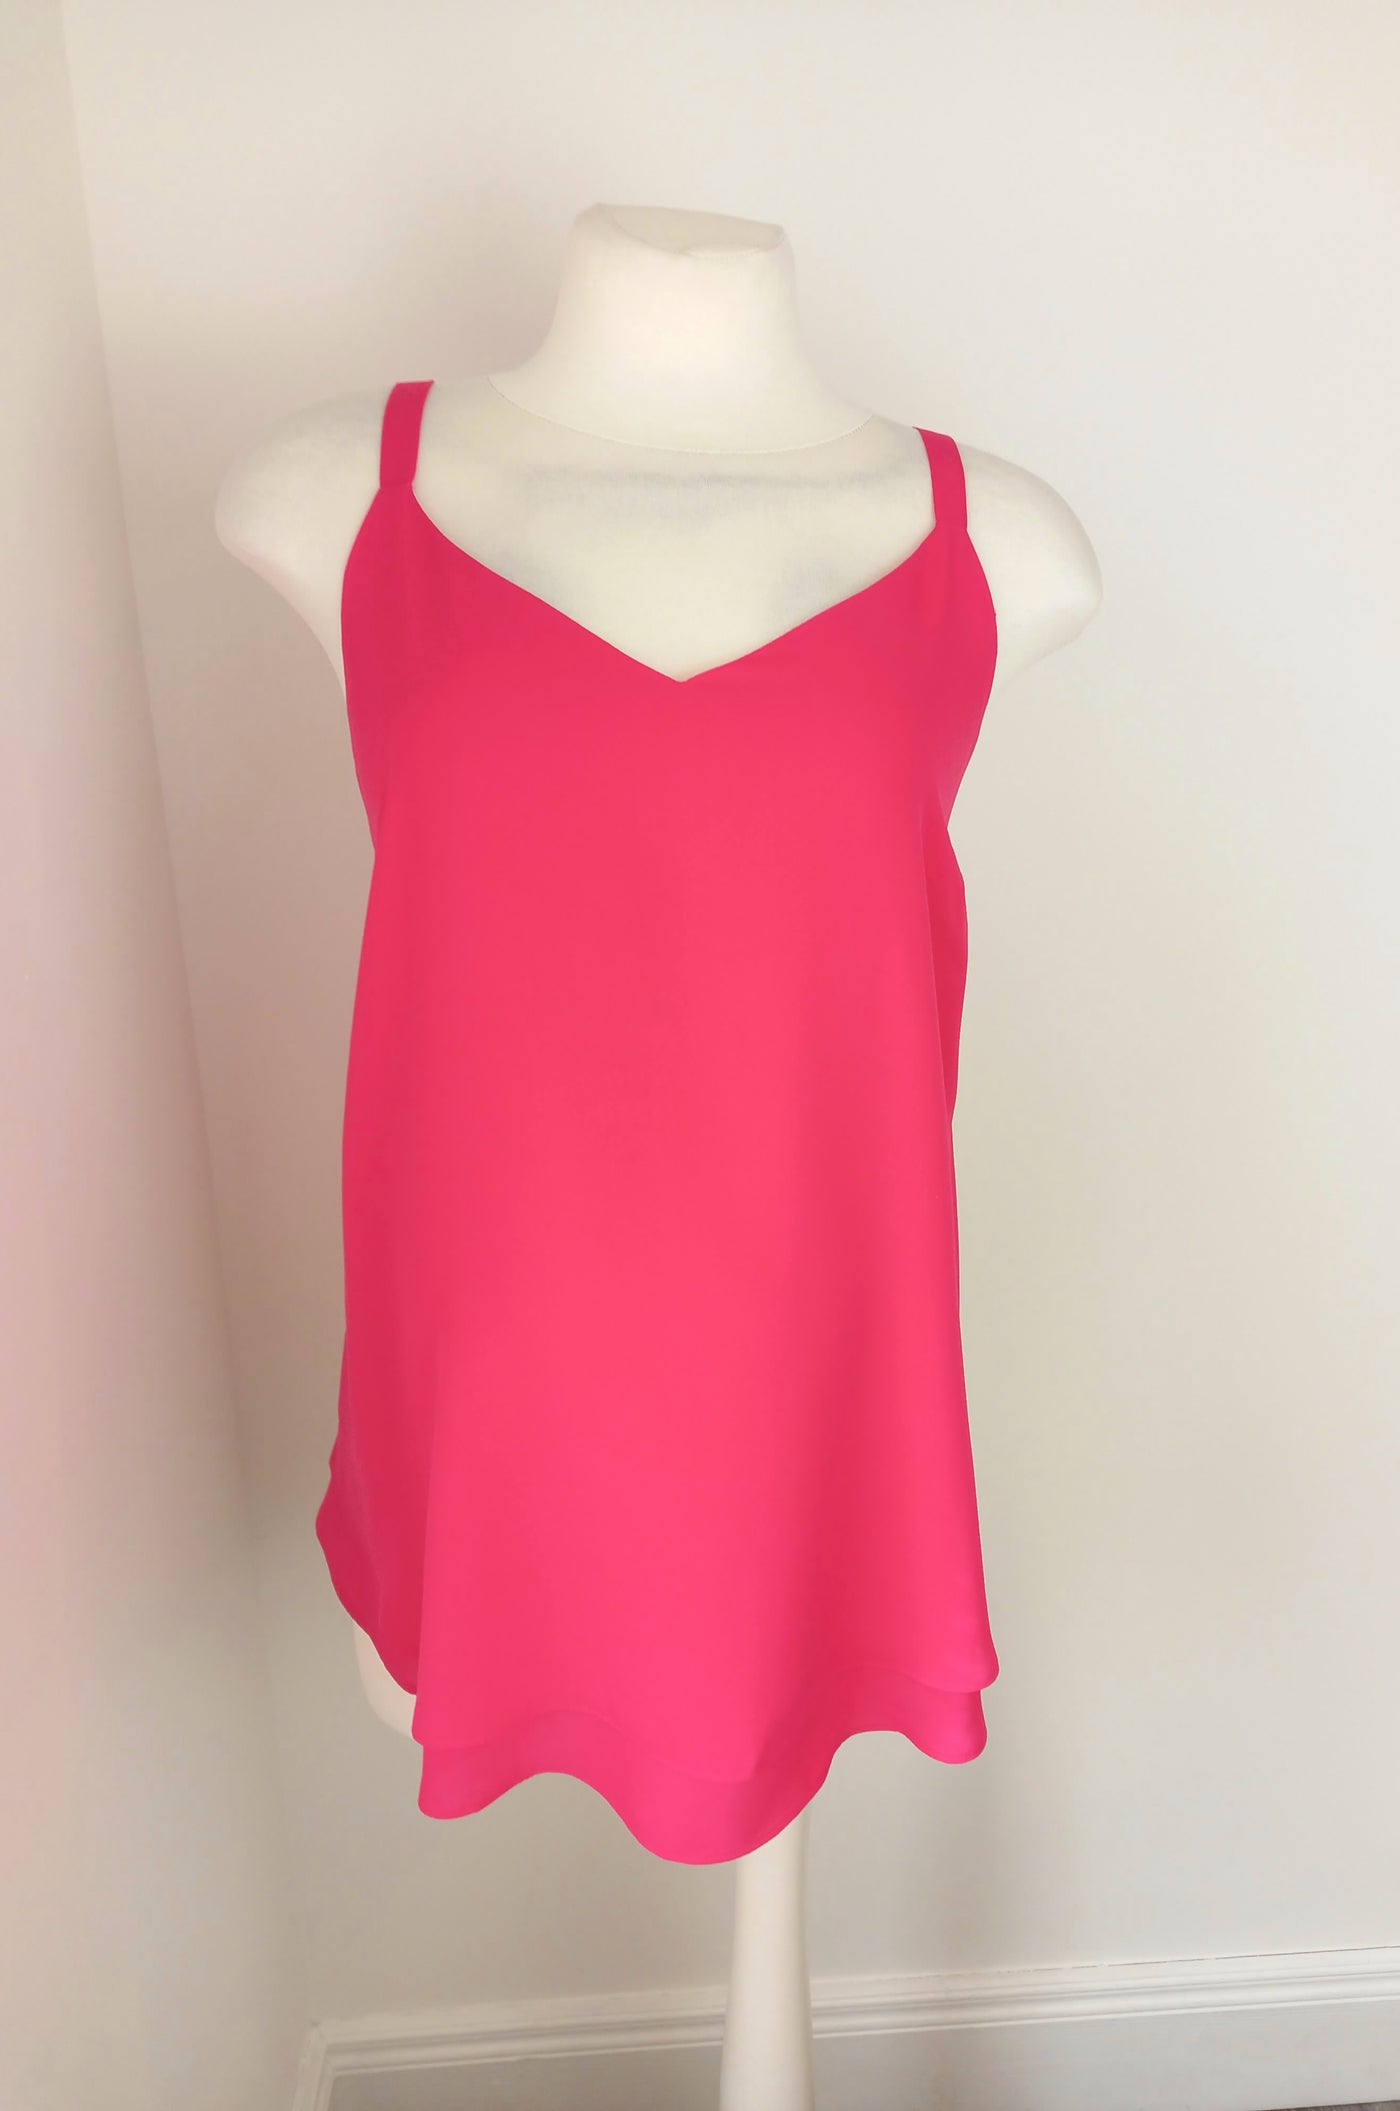 George Maternity hot pink camisole top - Size 12